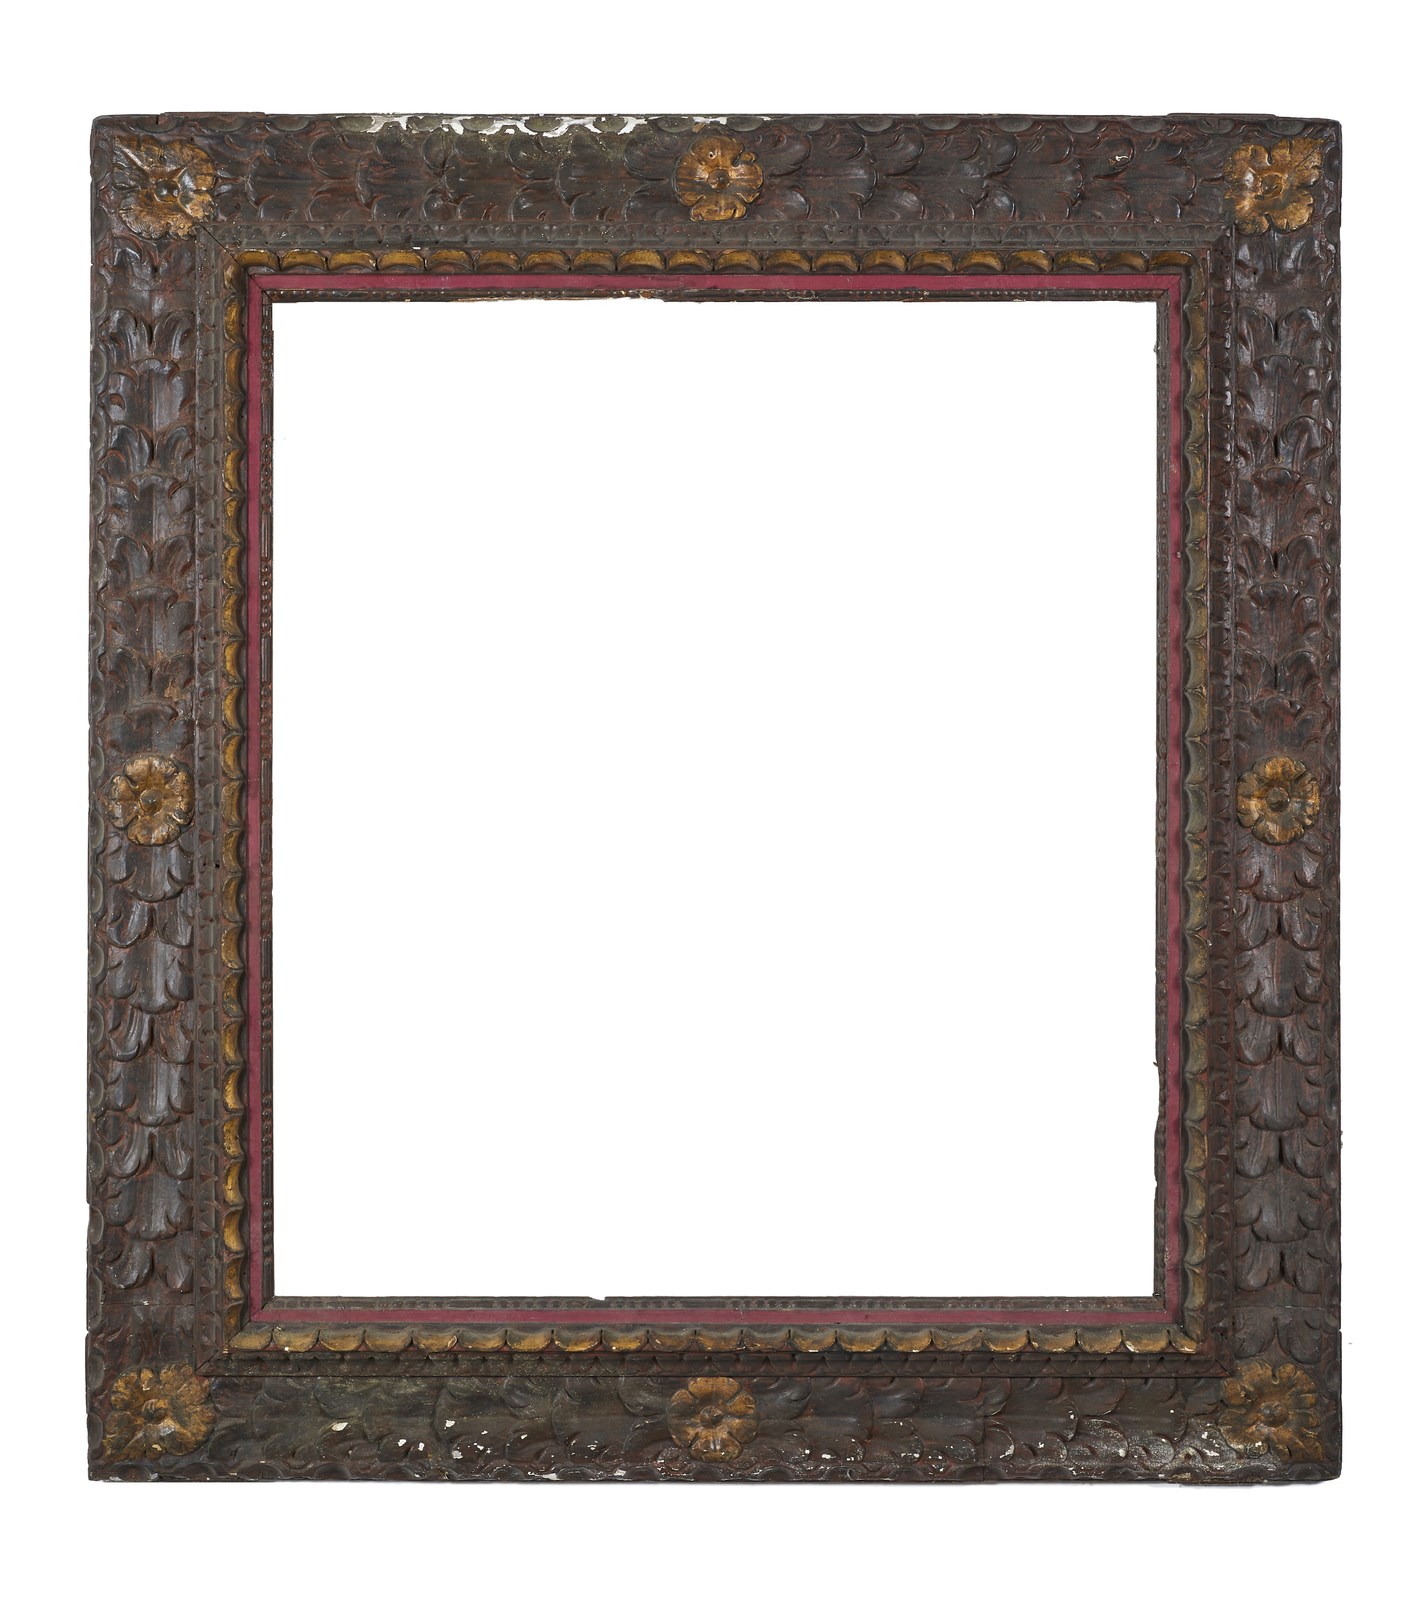 A carved and partially gilt wood frame, band decorated with an acanthus leaf motif, floral applications in the center and at the corners ( Manifattura Del XVII Secolo)